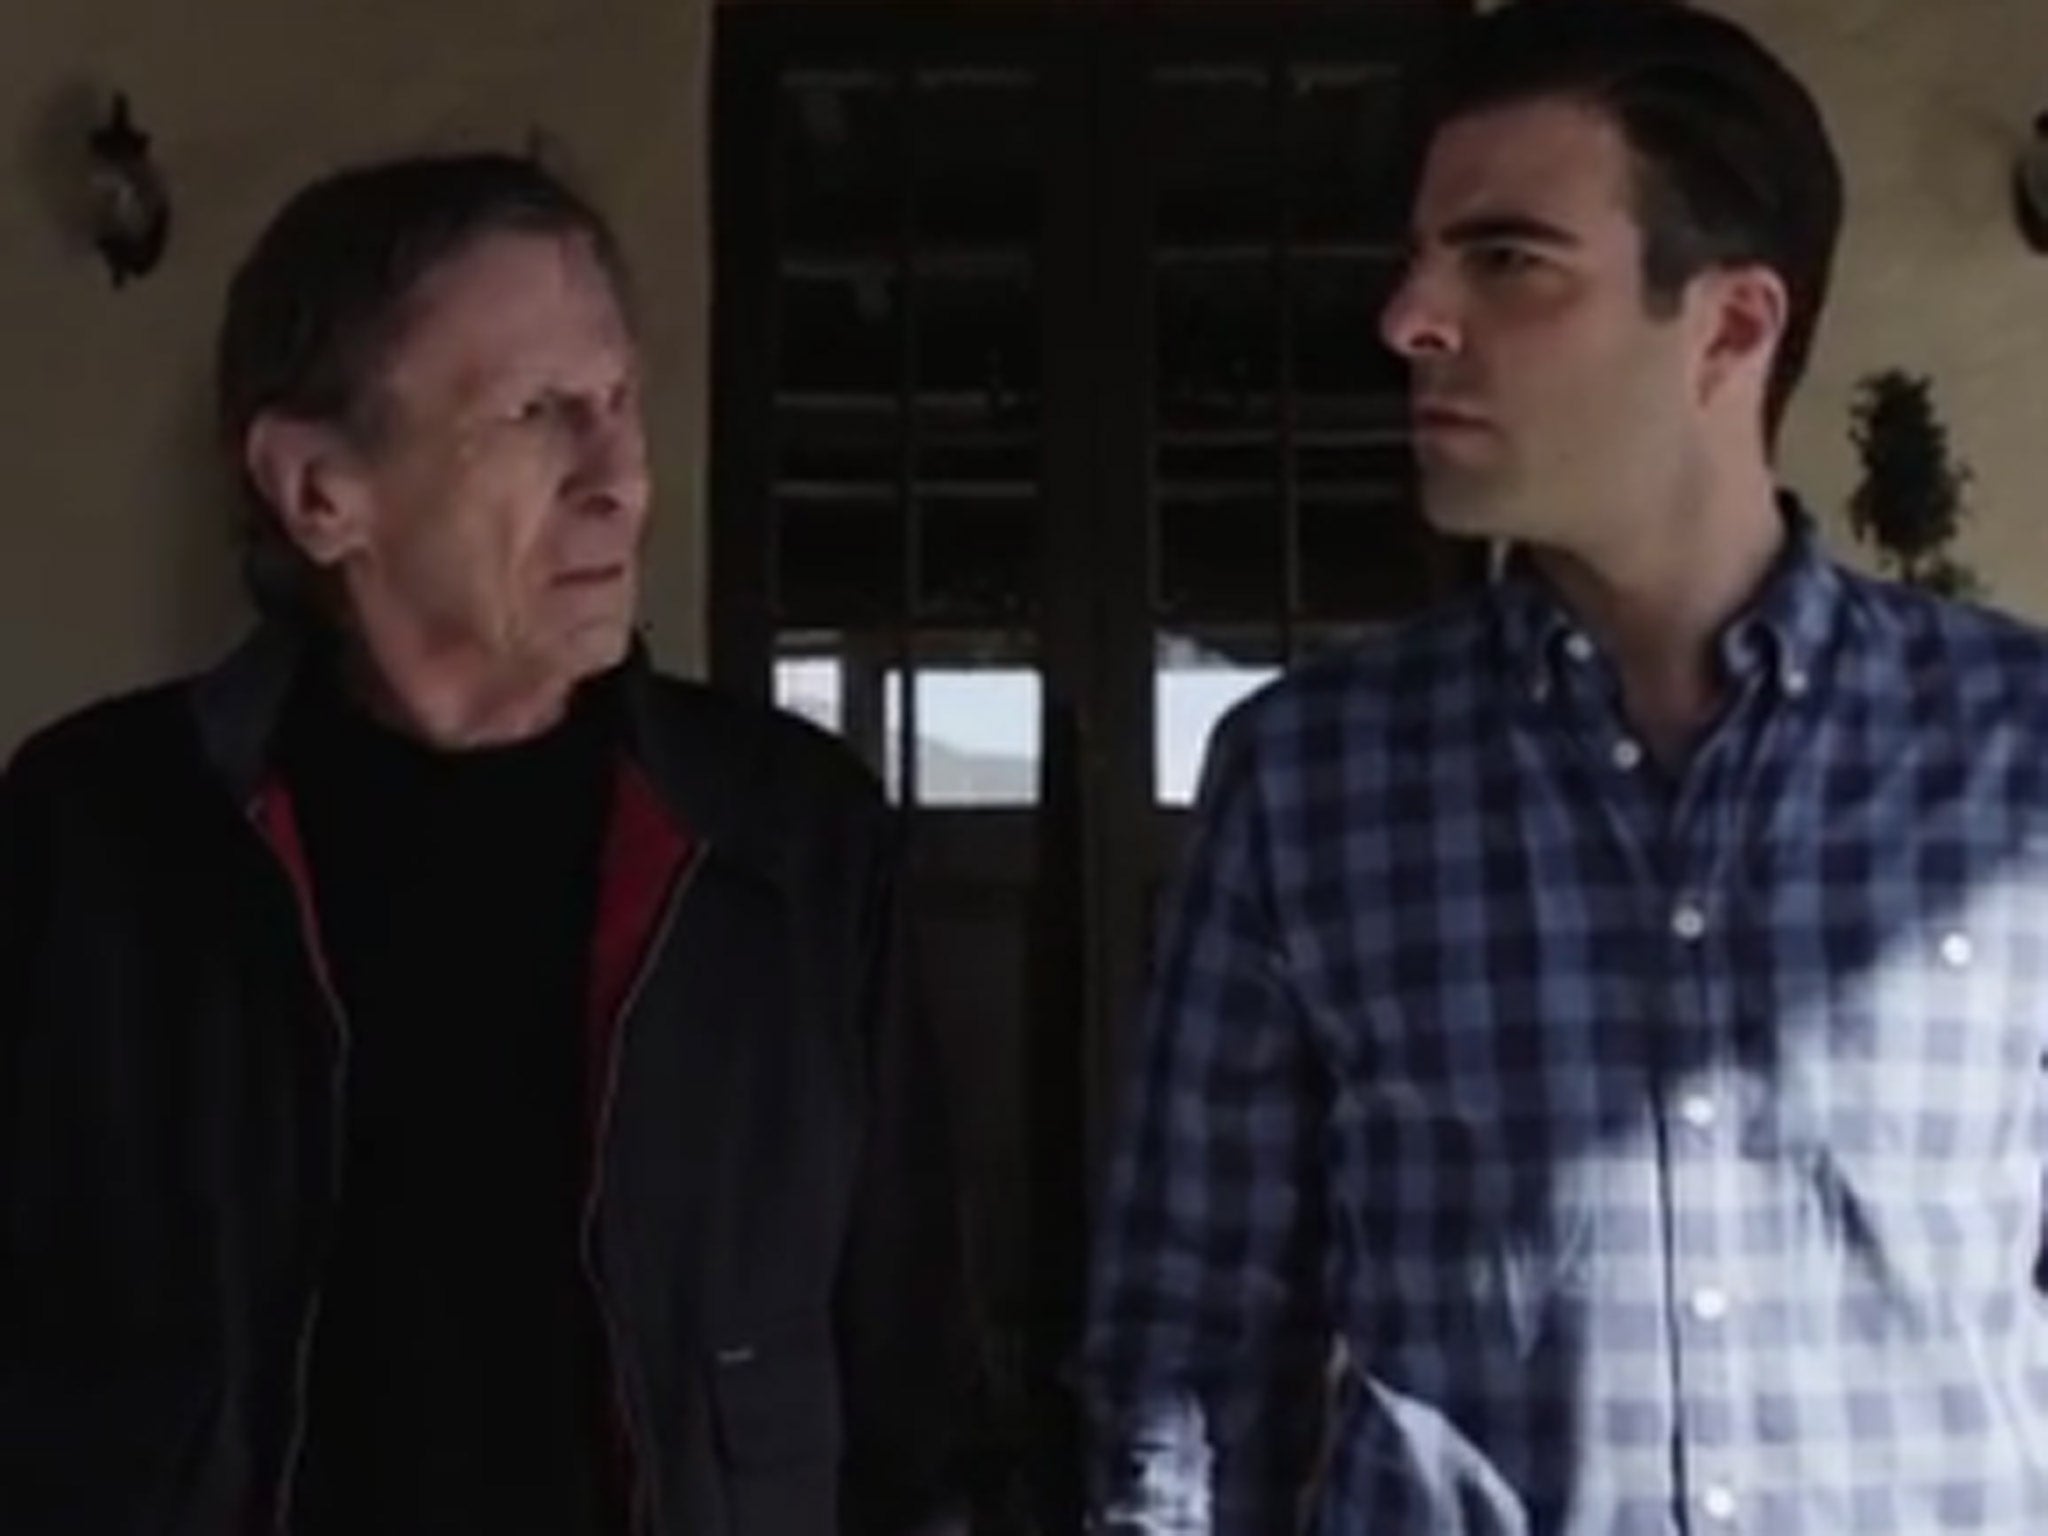 Fascinating: Star Trek actors Leonard Nimoy and Zachary Quinto in the advert